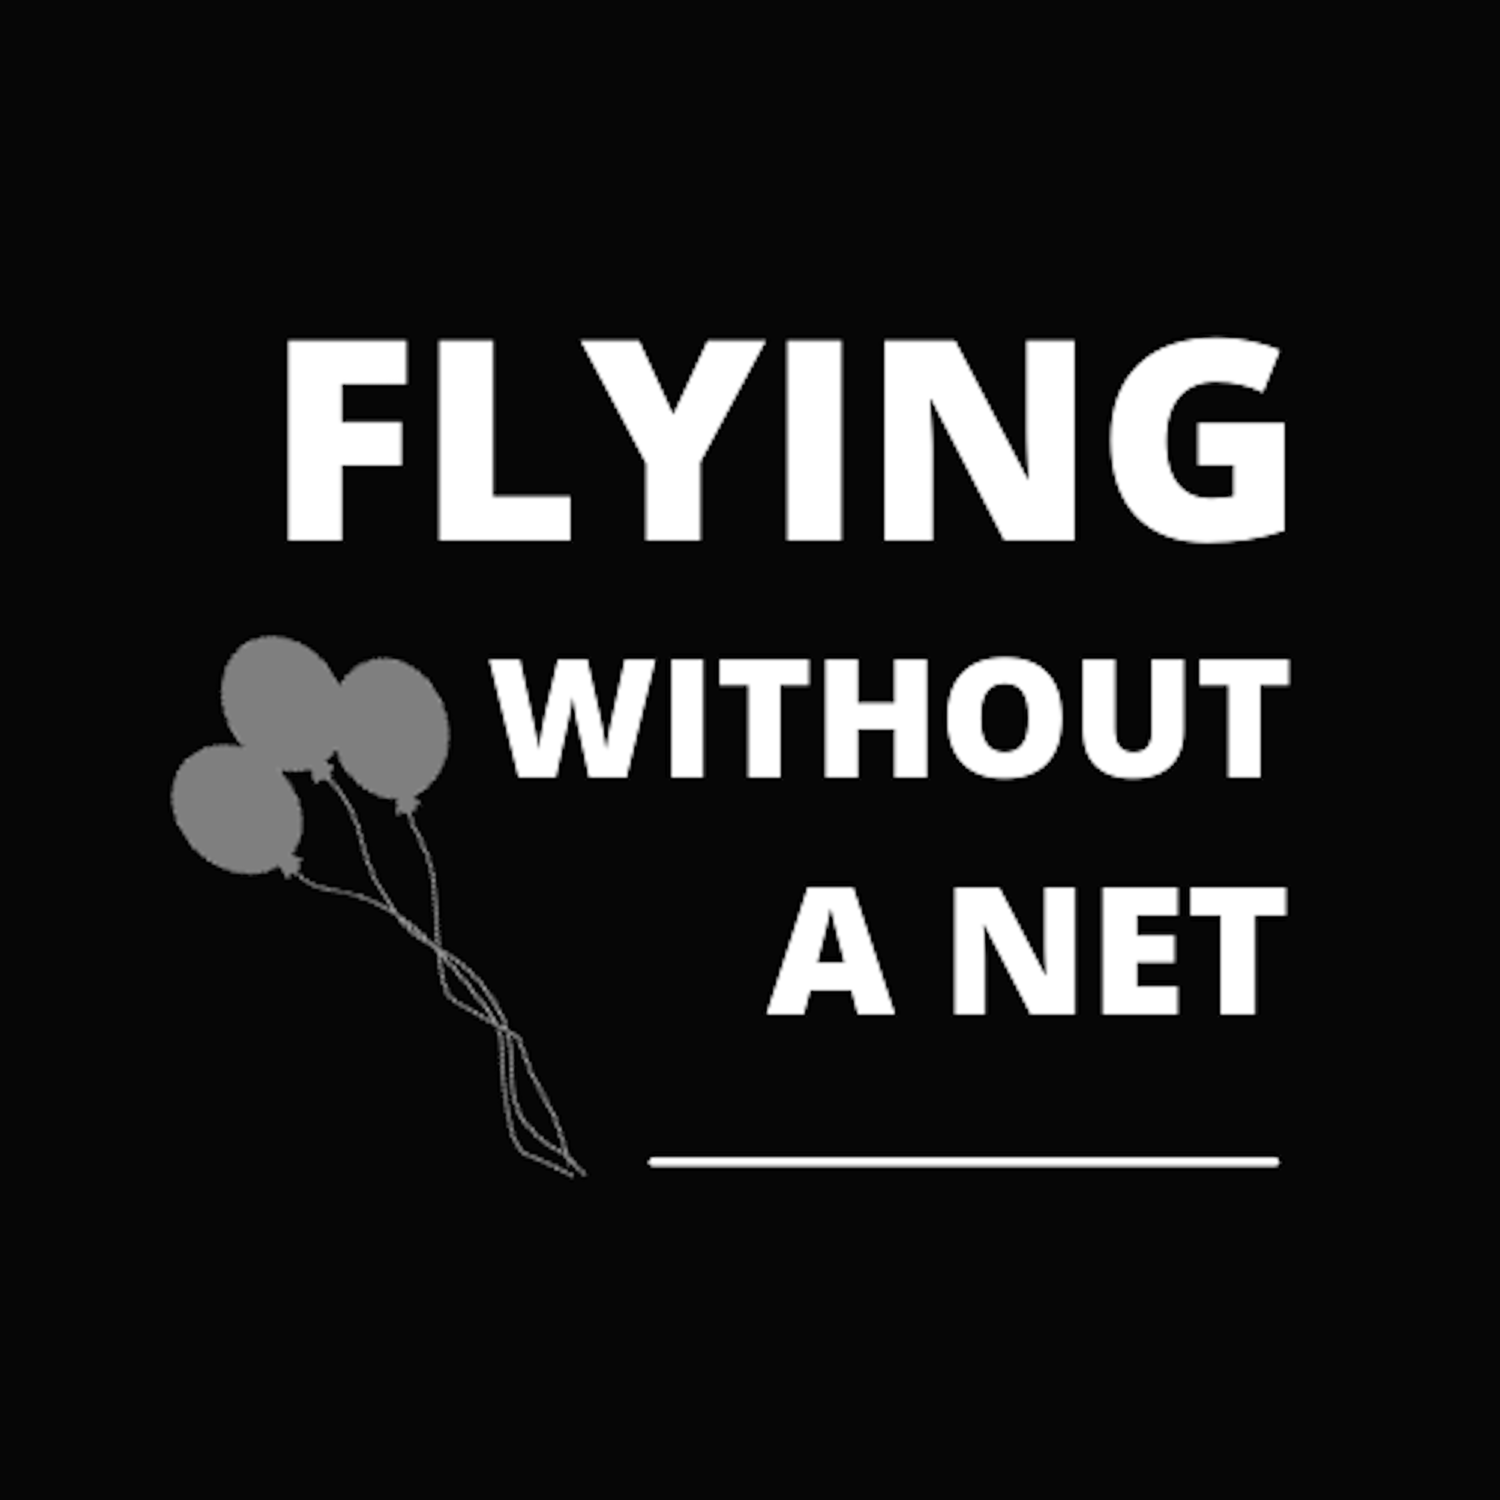 FLYING WITHOUT A NET